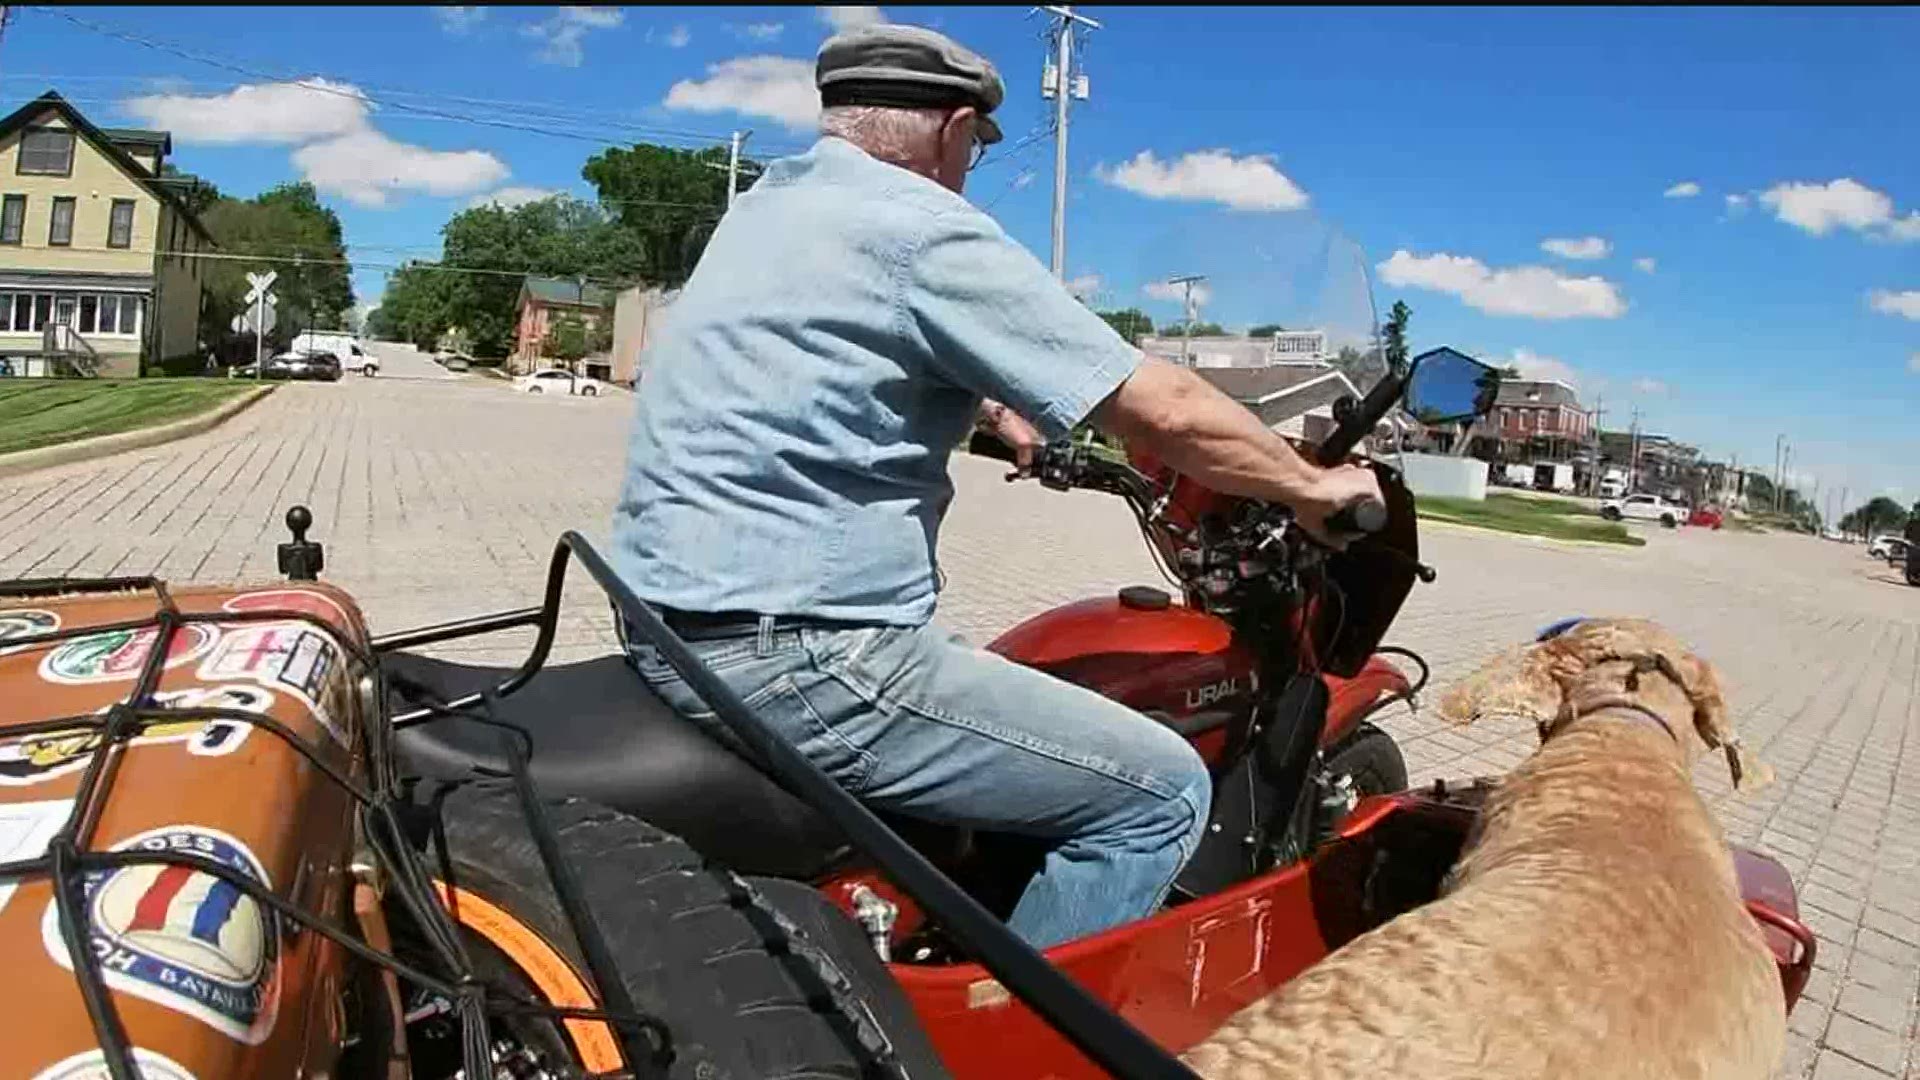 Dan Campbell and his dog, Copper, decided to see the country - during quarantine - in his motorcycle equipped with a sidecar.